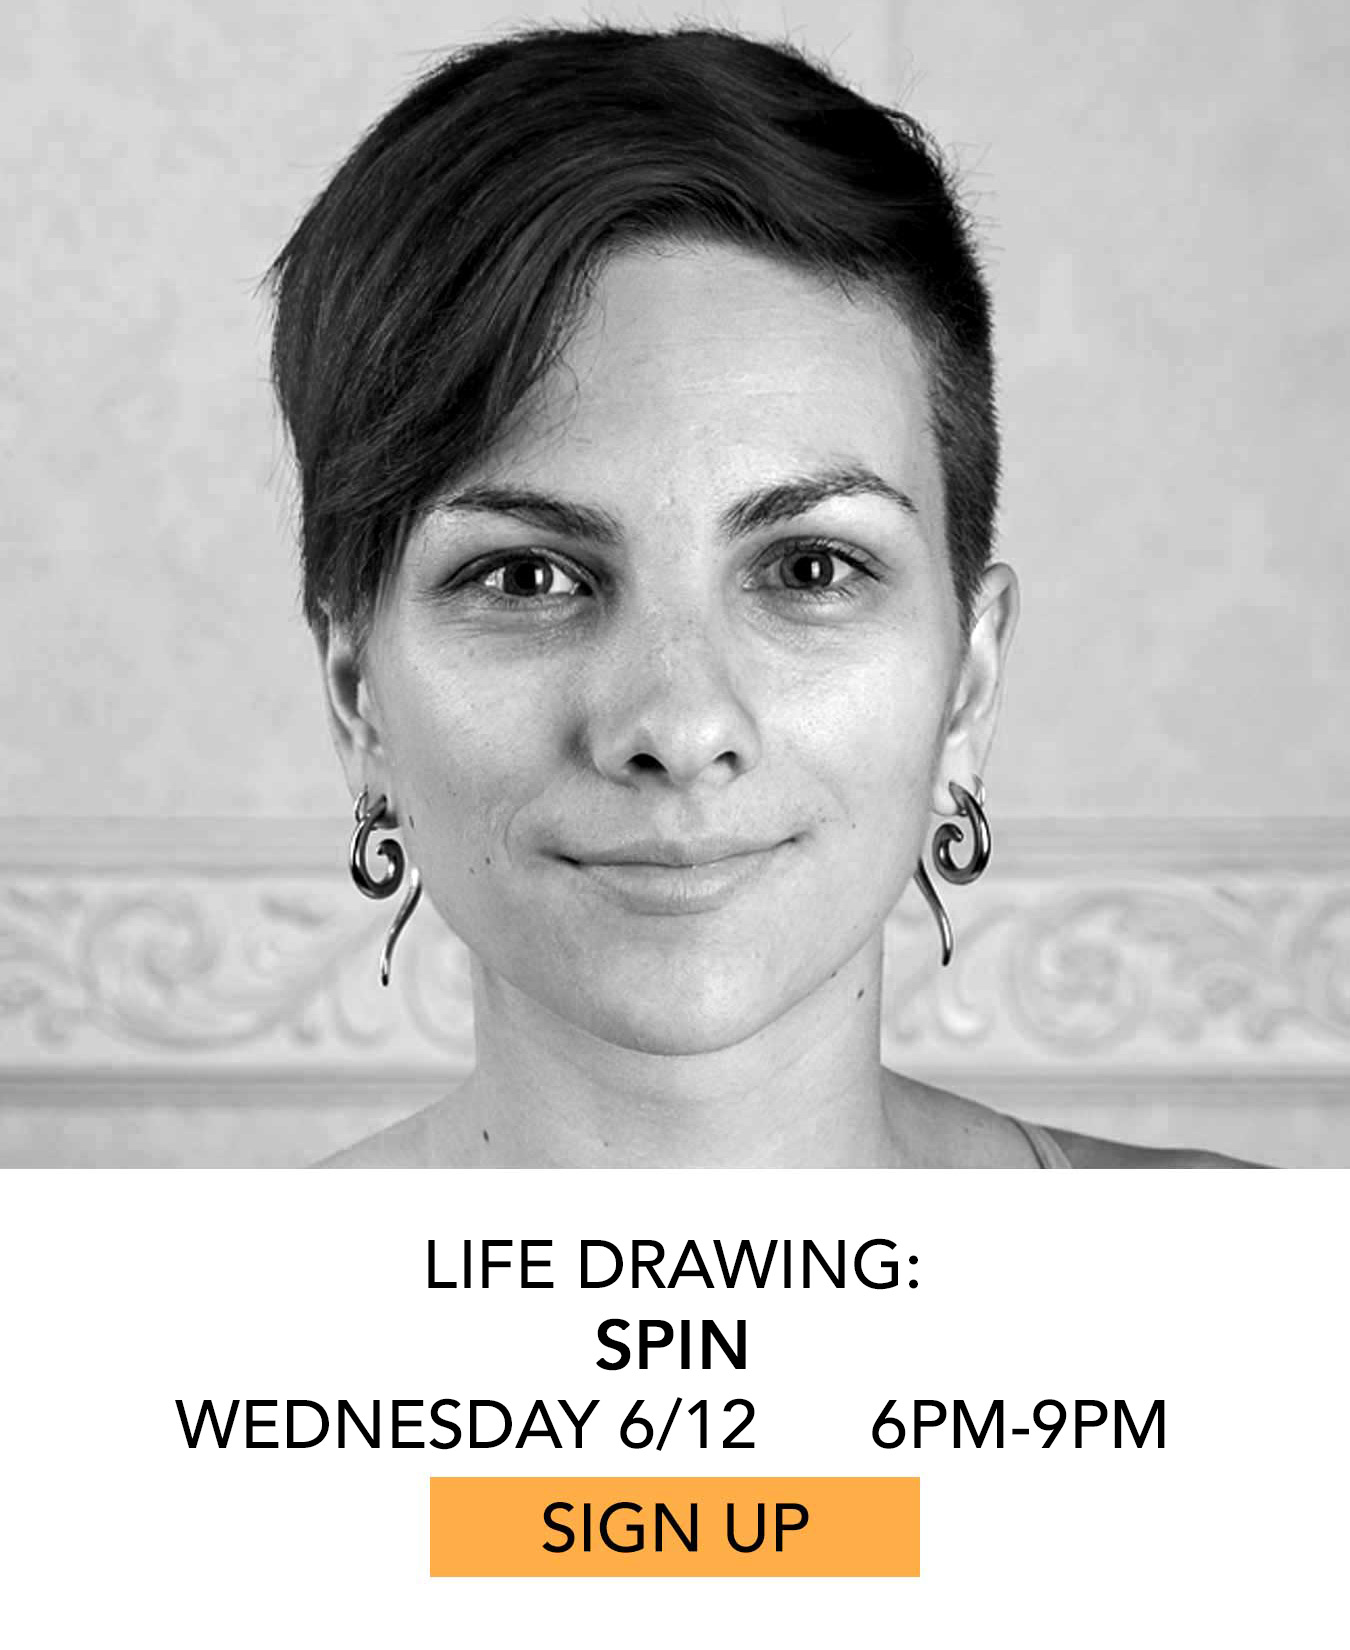 Life Drawing: Spin. Wednesday 6/12 from 6pm to 9pm. Click to Sign Up.